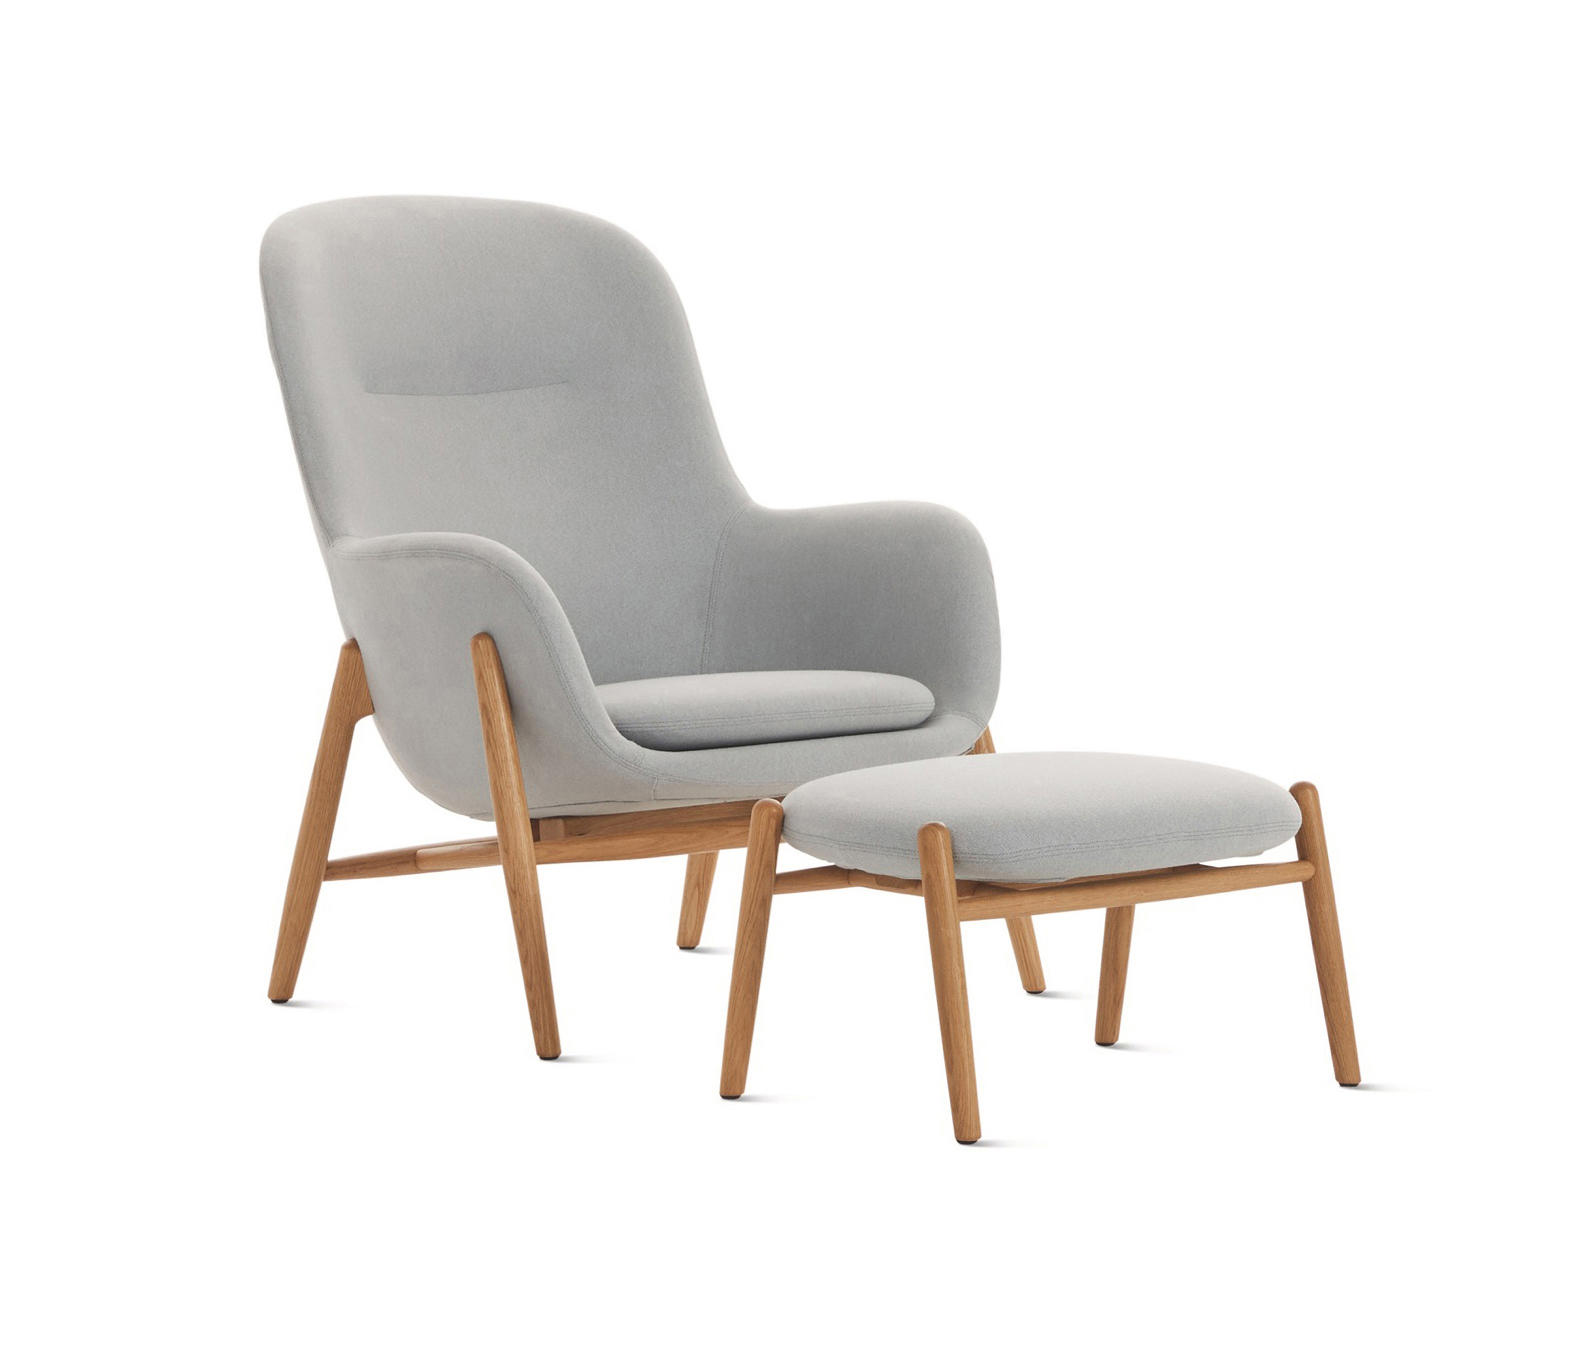 Nora Lounge Chair and Ottoman | Architonic